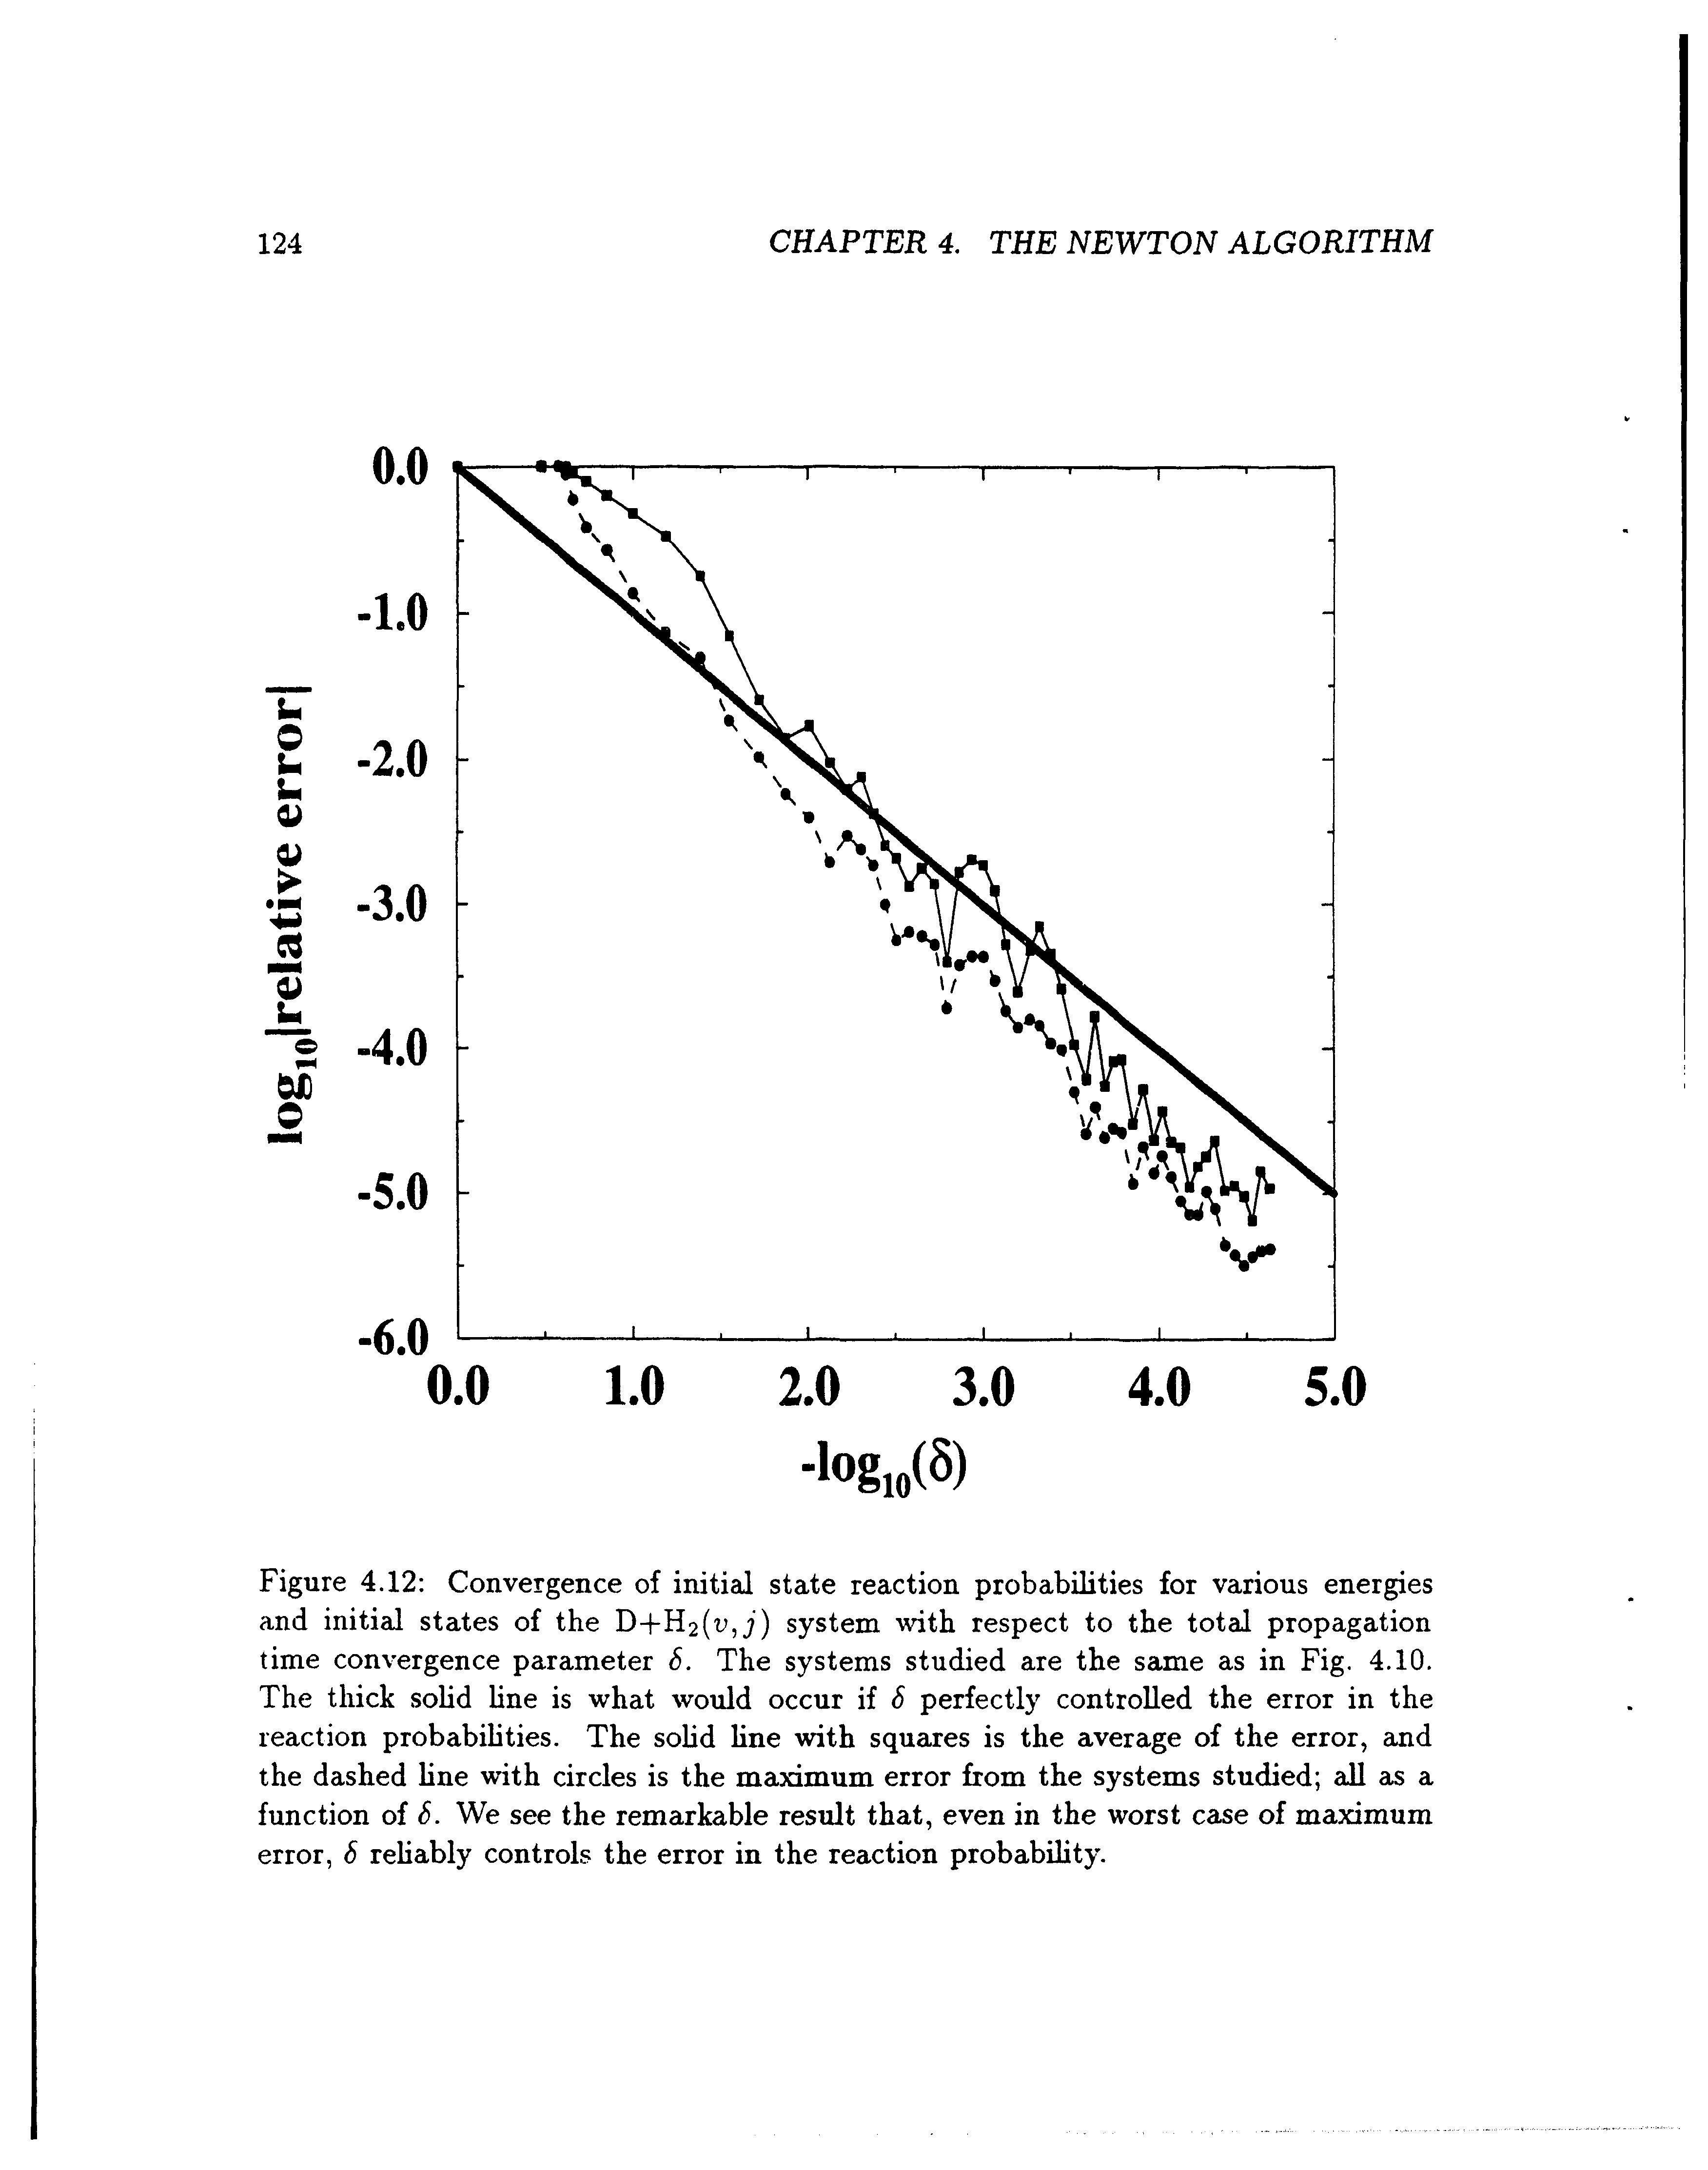 Figure 4.12 Convergence of initial state reaction probabilities for various energies and initial states of the D+H2(v,i) system with respect to the total propagation time convergence parameter S. The systems studied are the same as in Fig. 4.10. The thick solid line is what would occur if S perfectly controlled the error in the reaction probabilities. The solid line with squares is the average of the error, and the dashed line with circles is the maximum error from the systems studied all as a function of S. We see the remarkable result that, even in the worst case of maximum error, S rehably controls the error in the reaction probability.